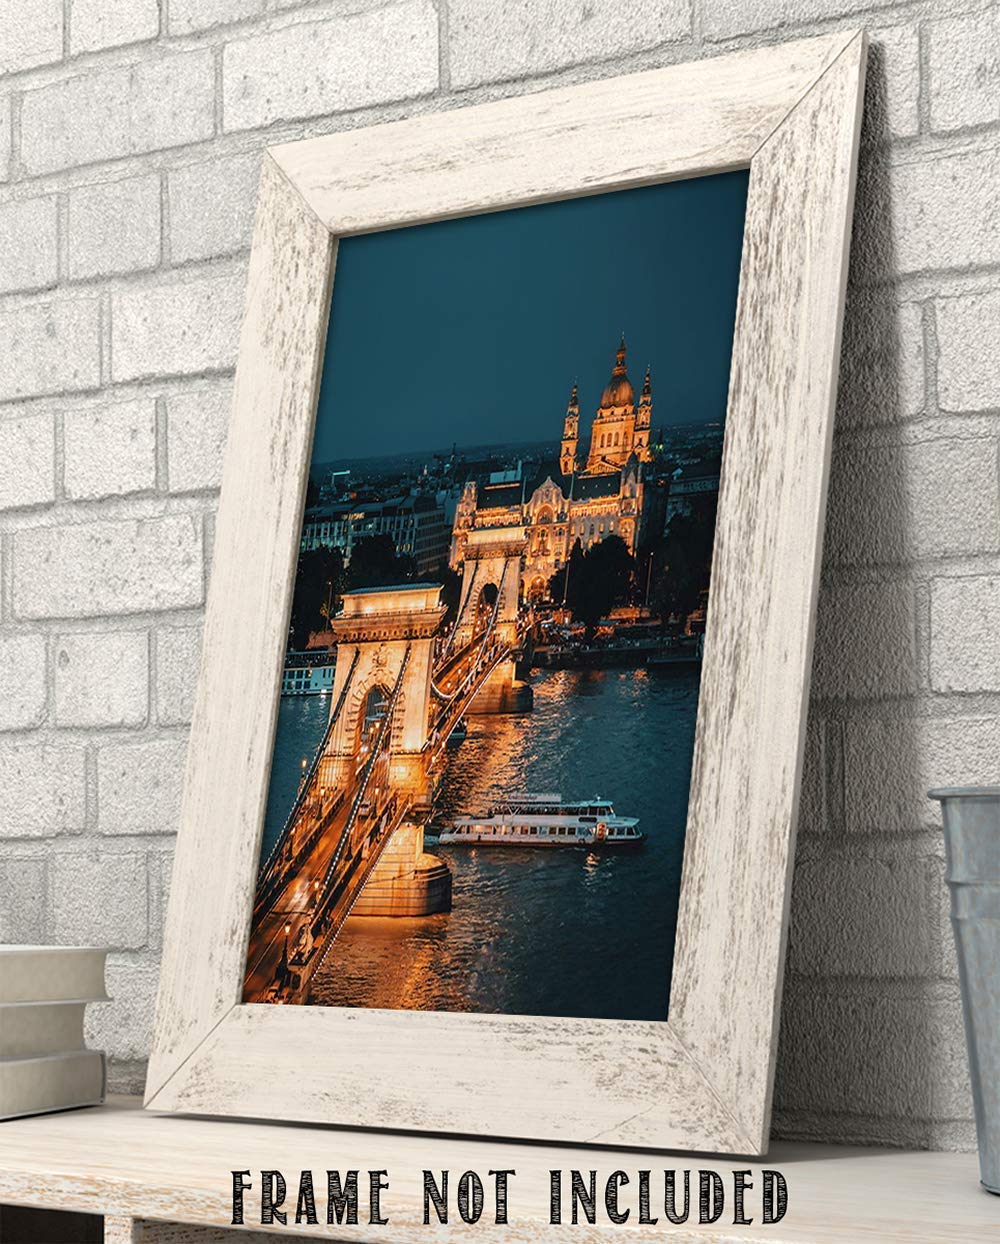 London Bridge Night Lights- 8 x 10 Print Wall Art-Ready to Frame. Home D?cor, Office D?cor & Wall Prints for Any Room. Beautiful London Bridge Over Thames River at Night-Great Gift for European Lovers